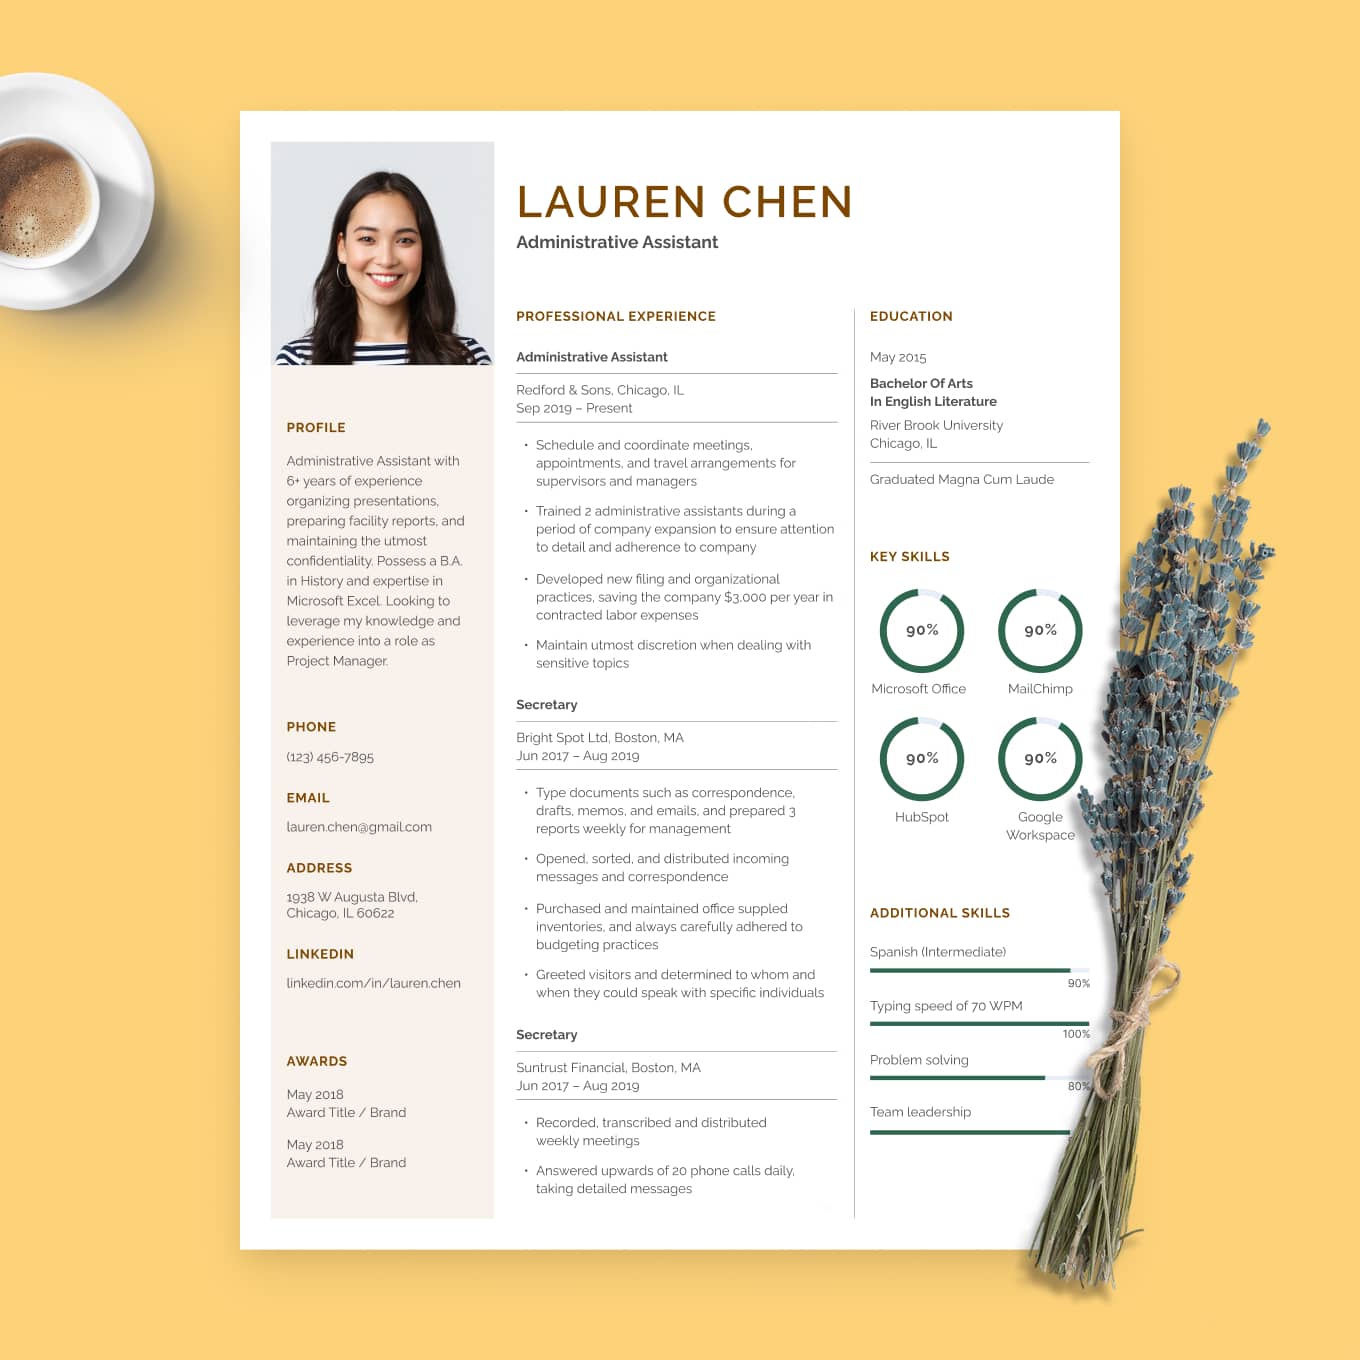 Our Millennial resume template on a wooden table with a fern frond beside it.